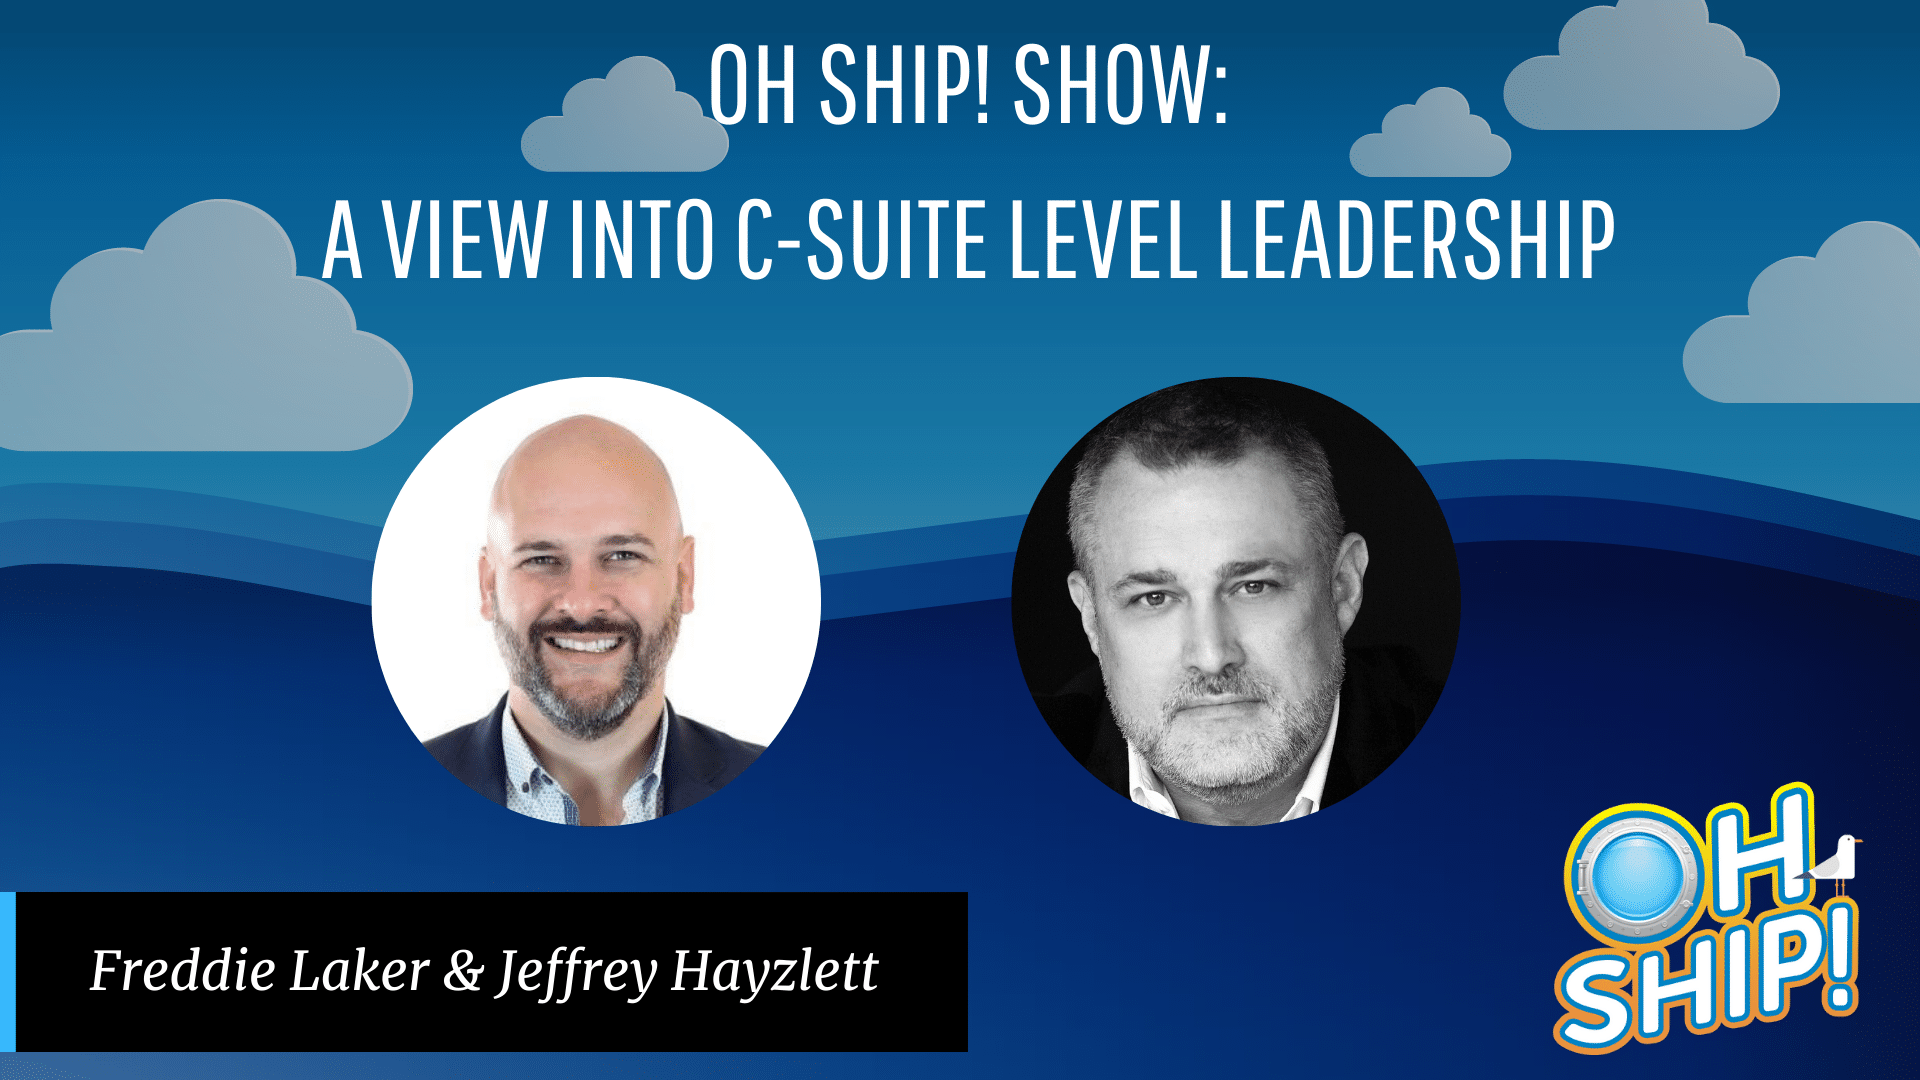 Promotional image for the "Oh Ship! Show: A View into C-Suite Leadership" featuring headshots of Freddie Laker and Jeffrey Hayzlett against a blue background with clouds. The show's logo is in the bottom right corner.